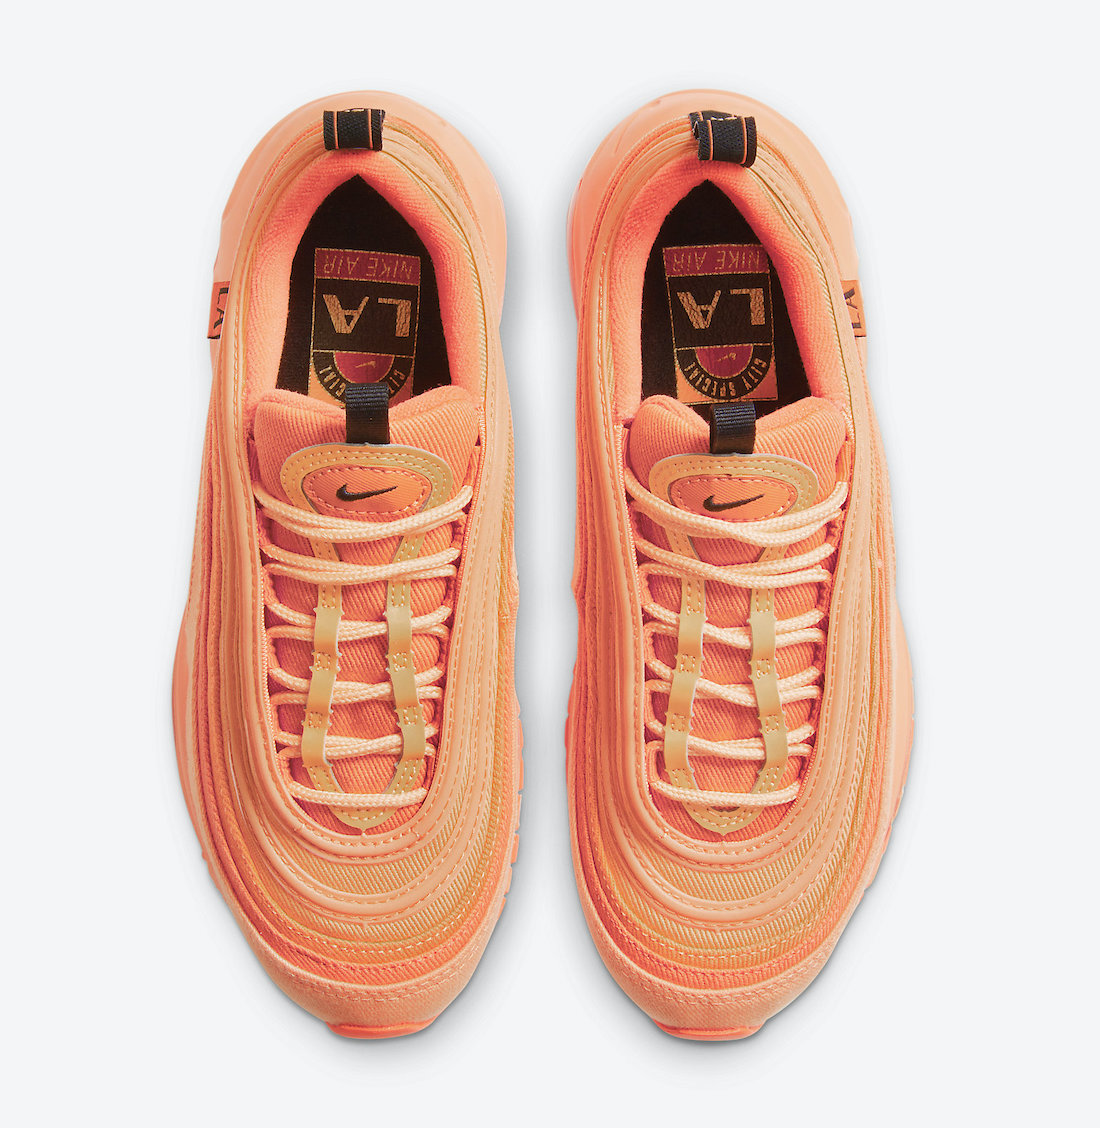 Nike Air Max 97 GS Los Angeles DH0148-800 Release Date